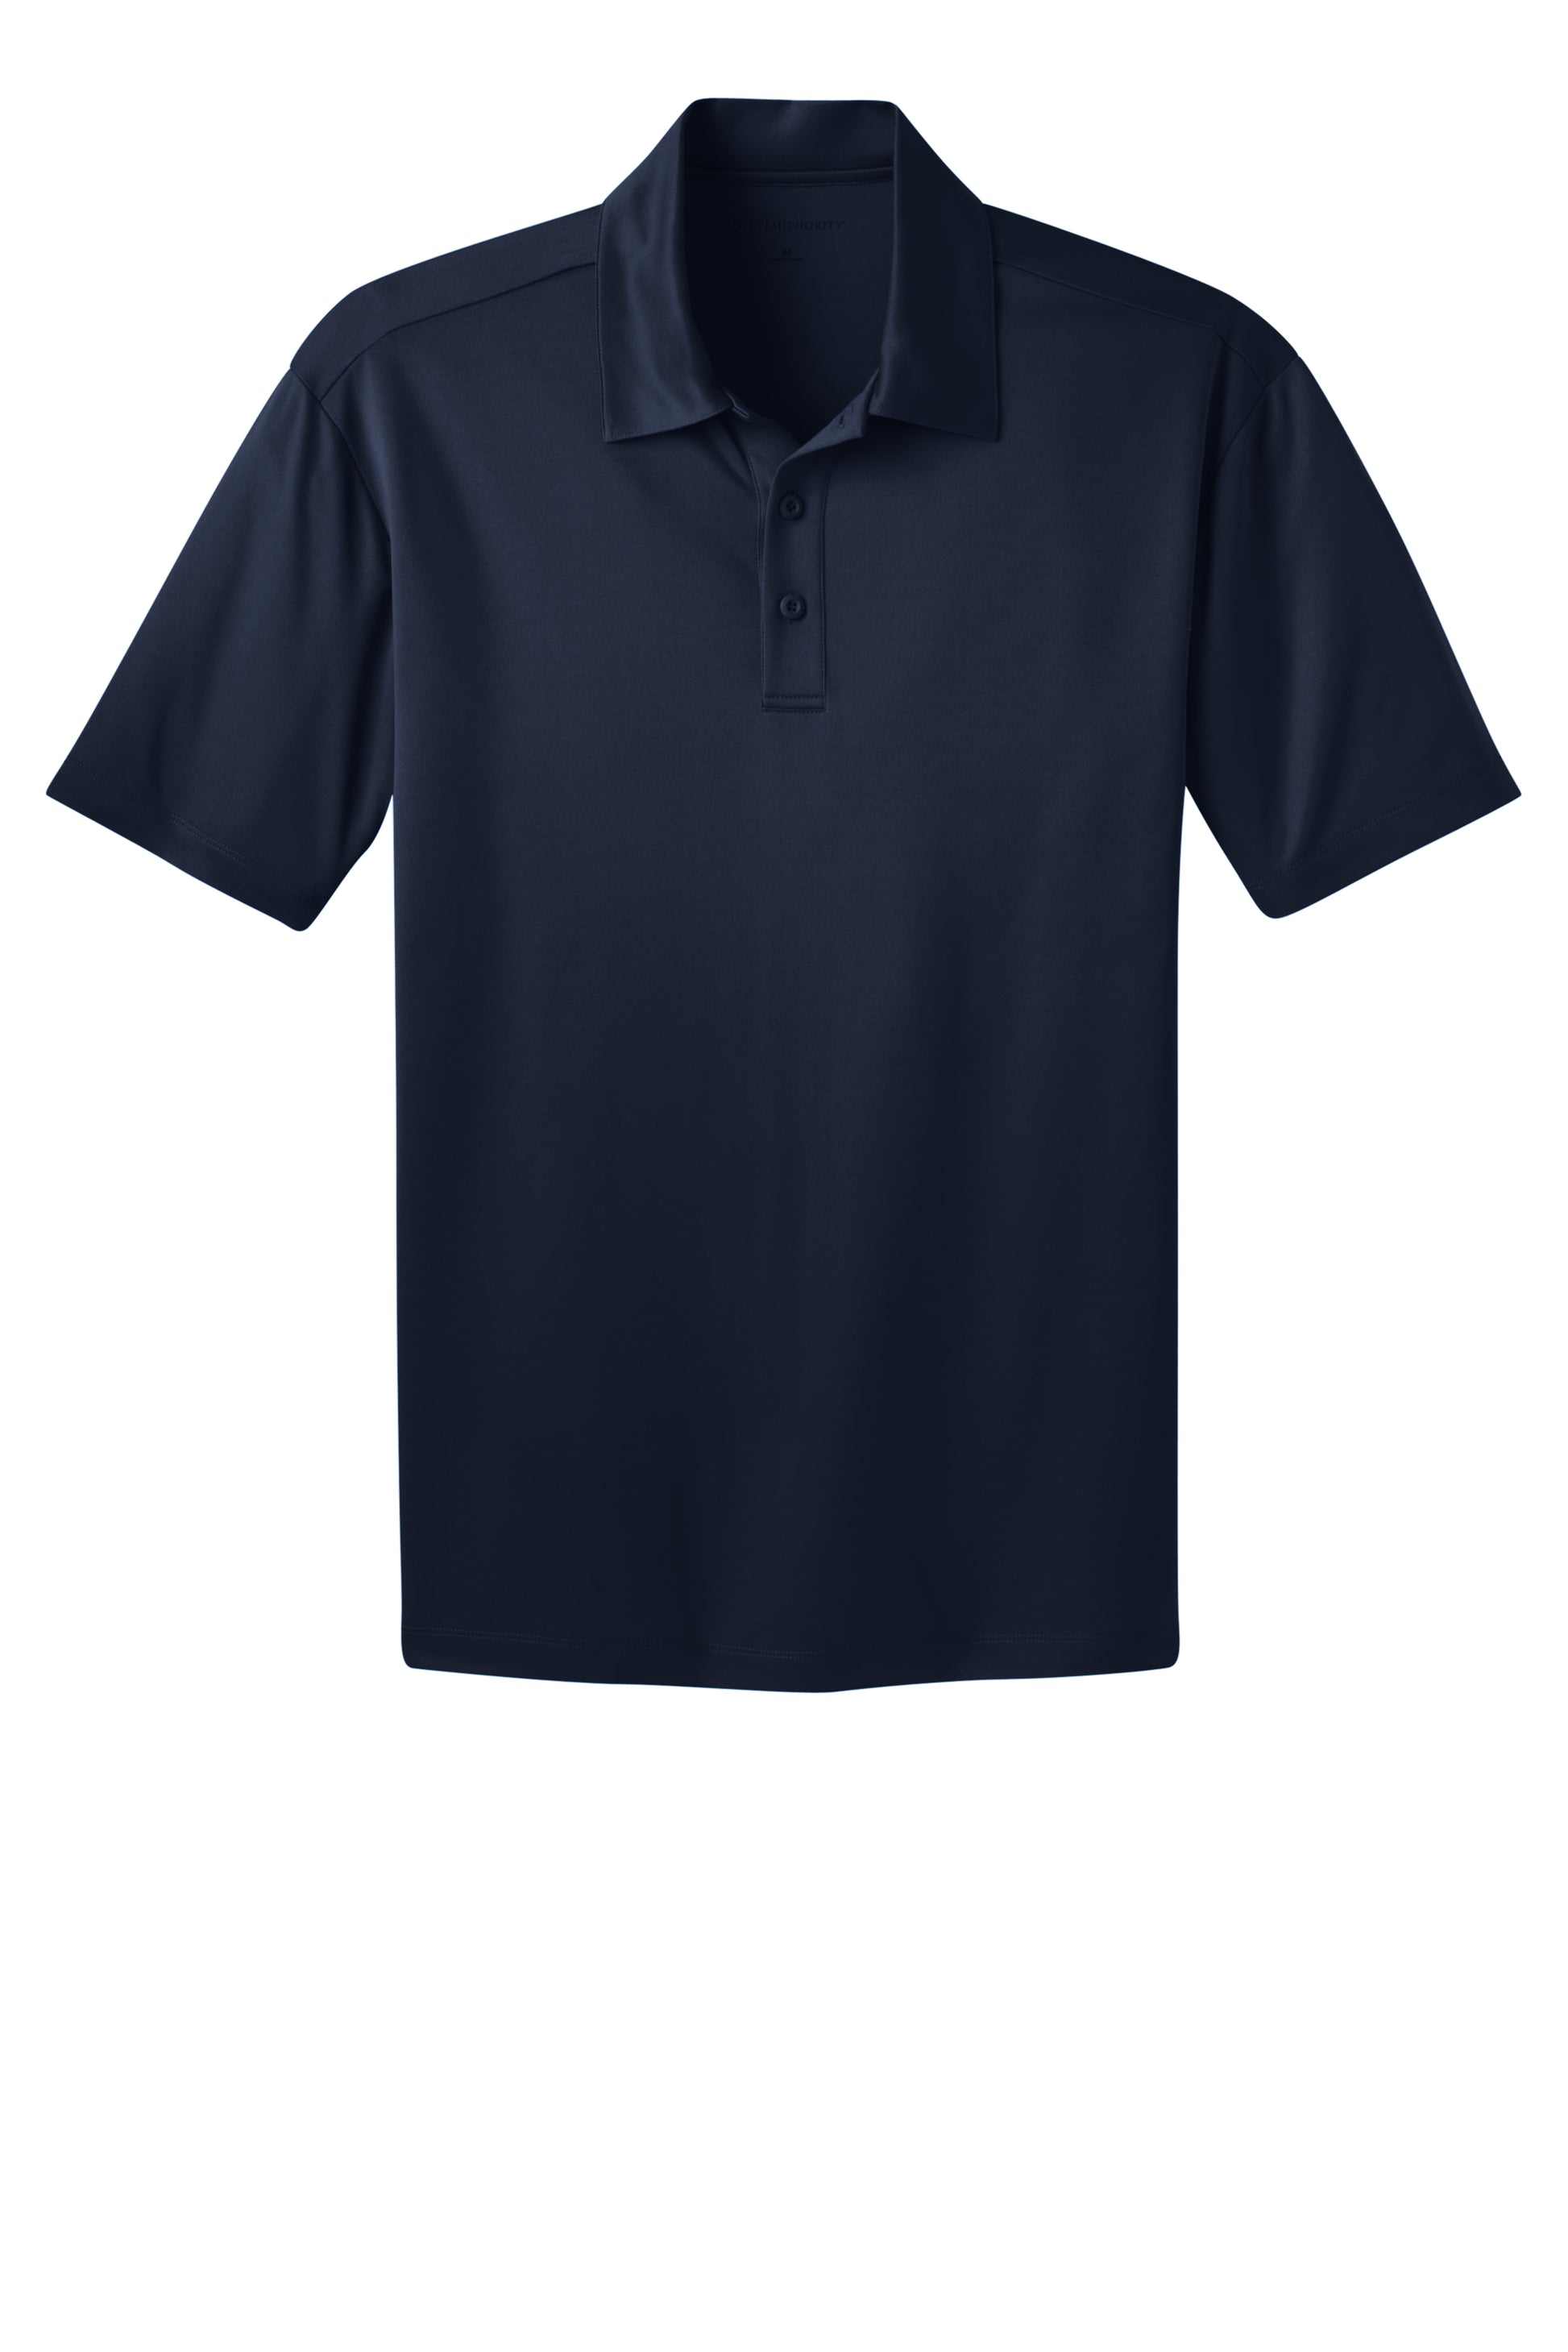 port authority silk touch polo navy